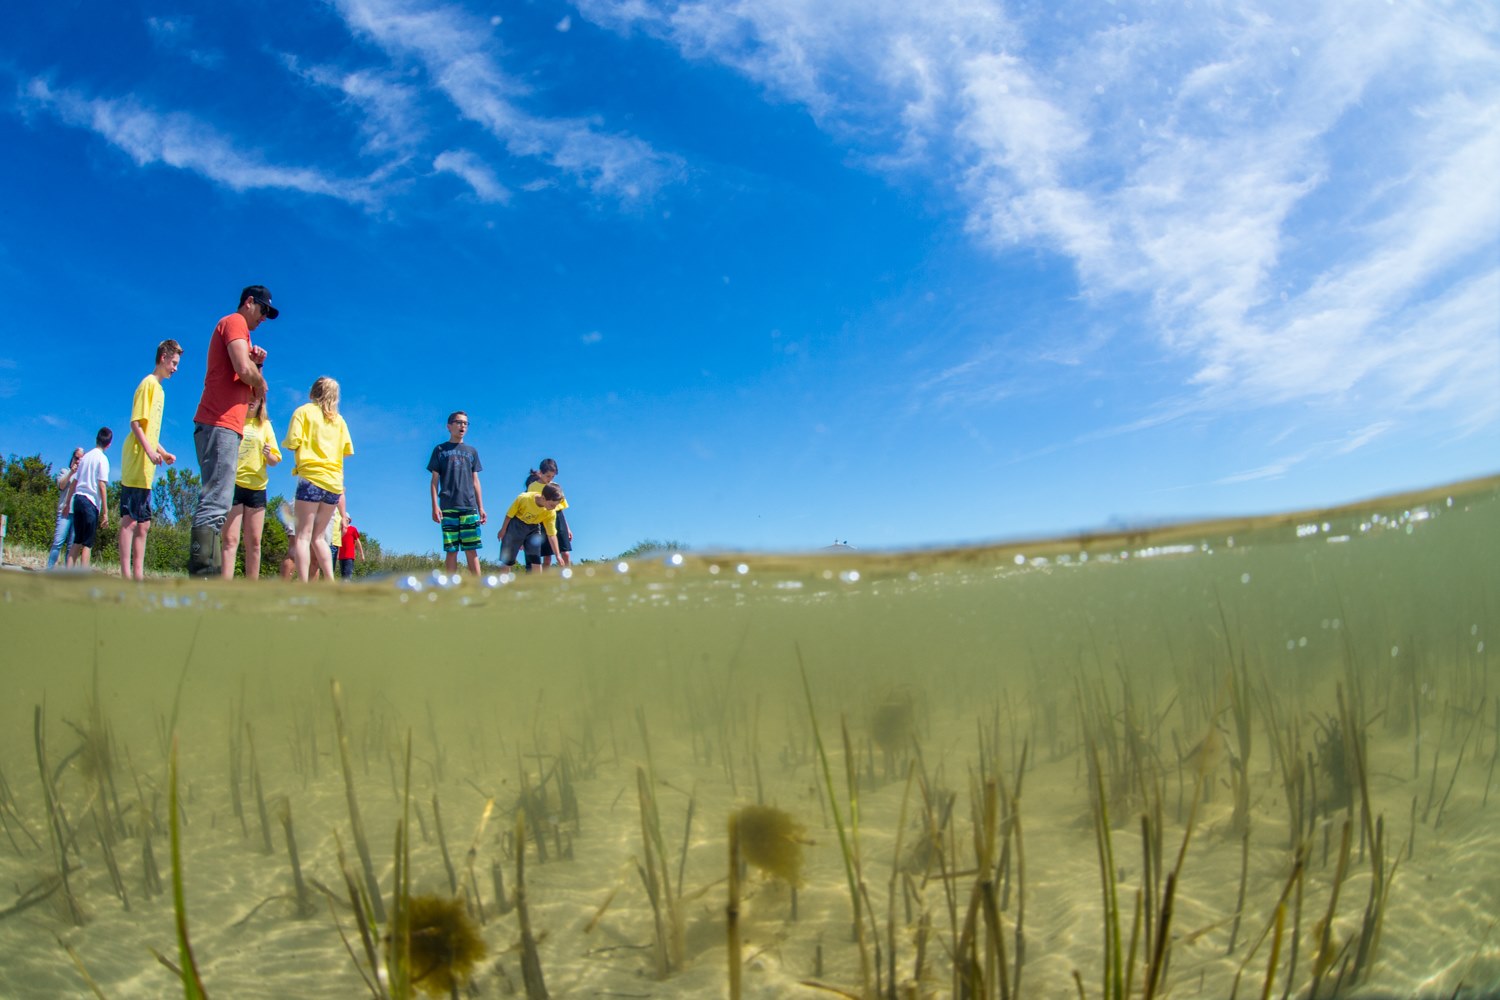 Bottom of photo shows sand and plants underwater, and top shows about 10 people standing in or near the water, with a blue sky behind them